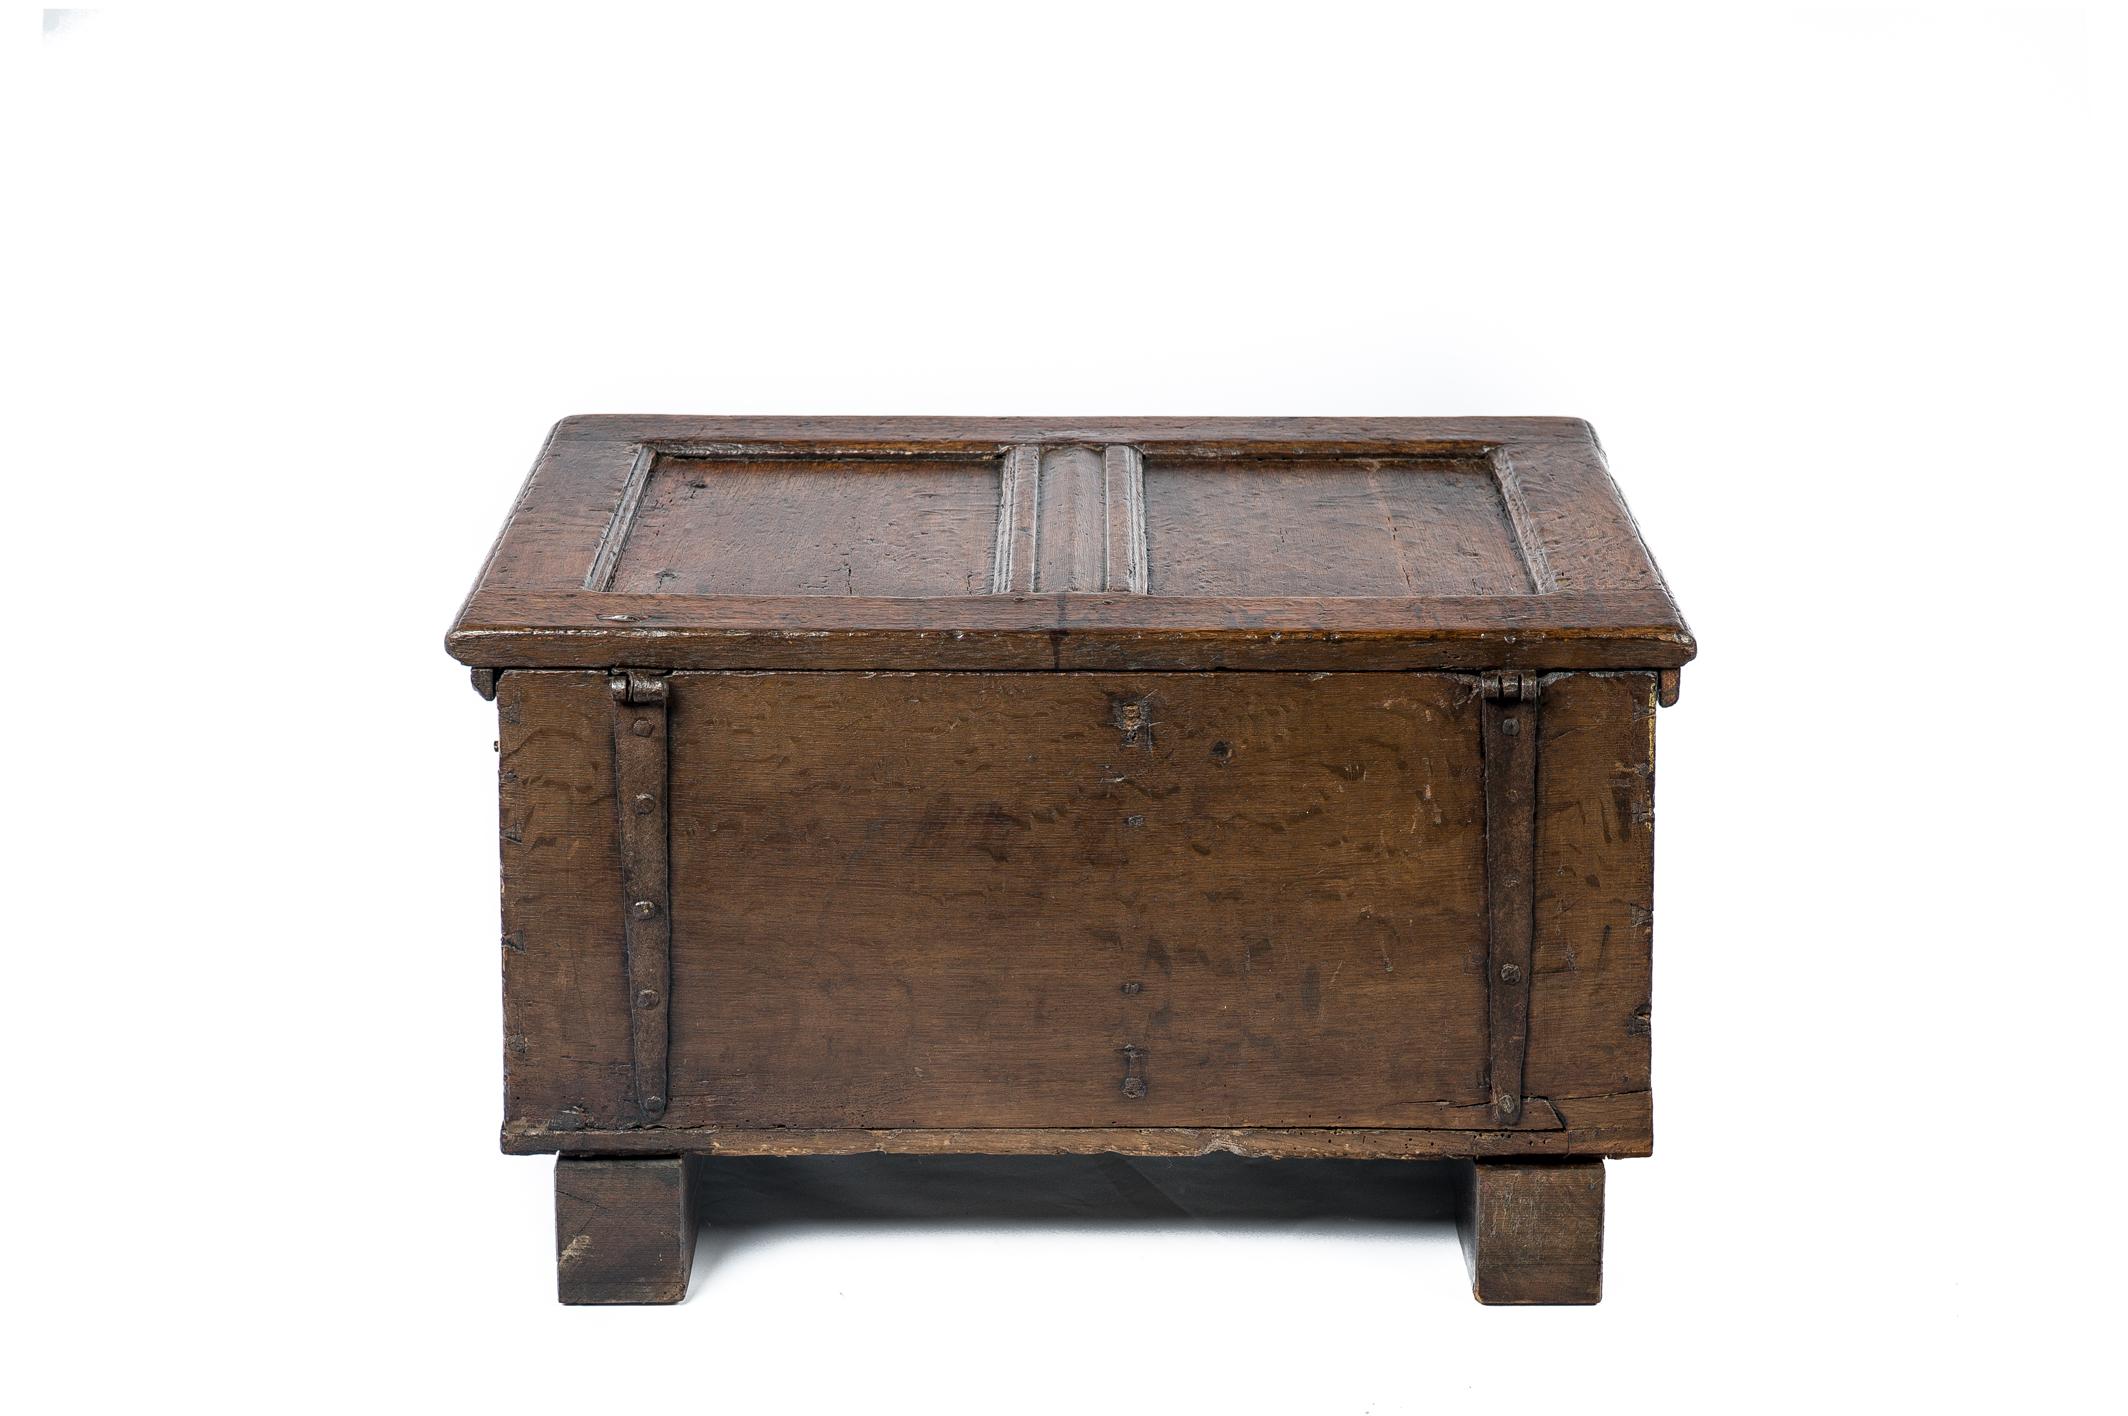 Small Antique Early 18th Century German Oak Paneled Trunk or Coffer For Sale 2